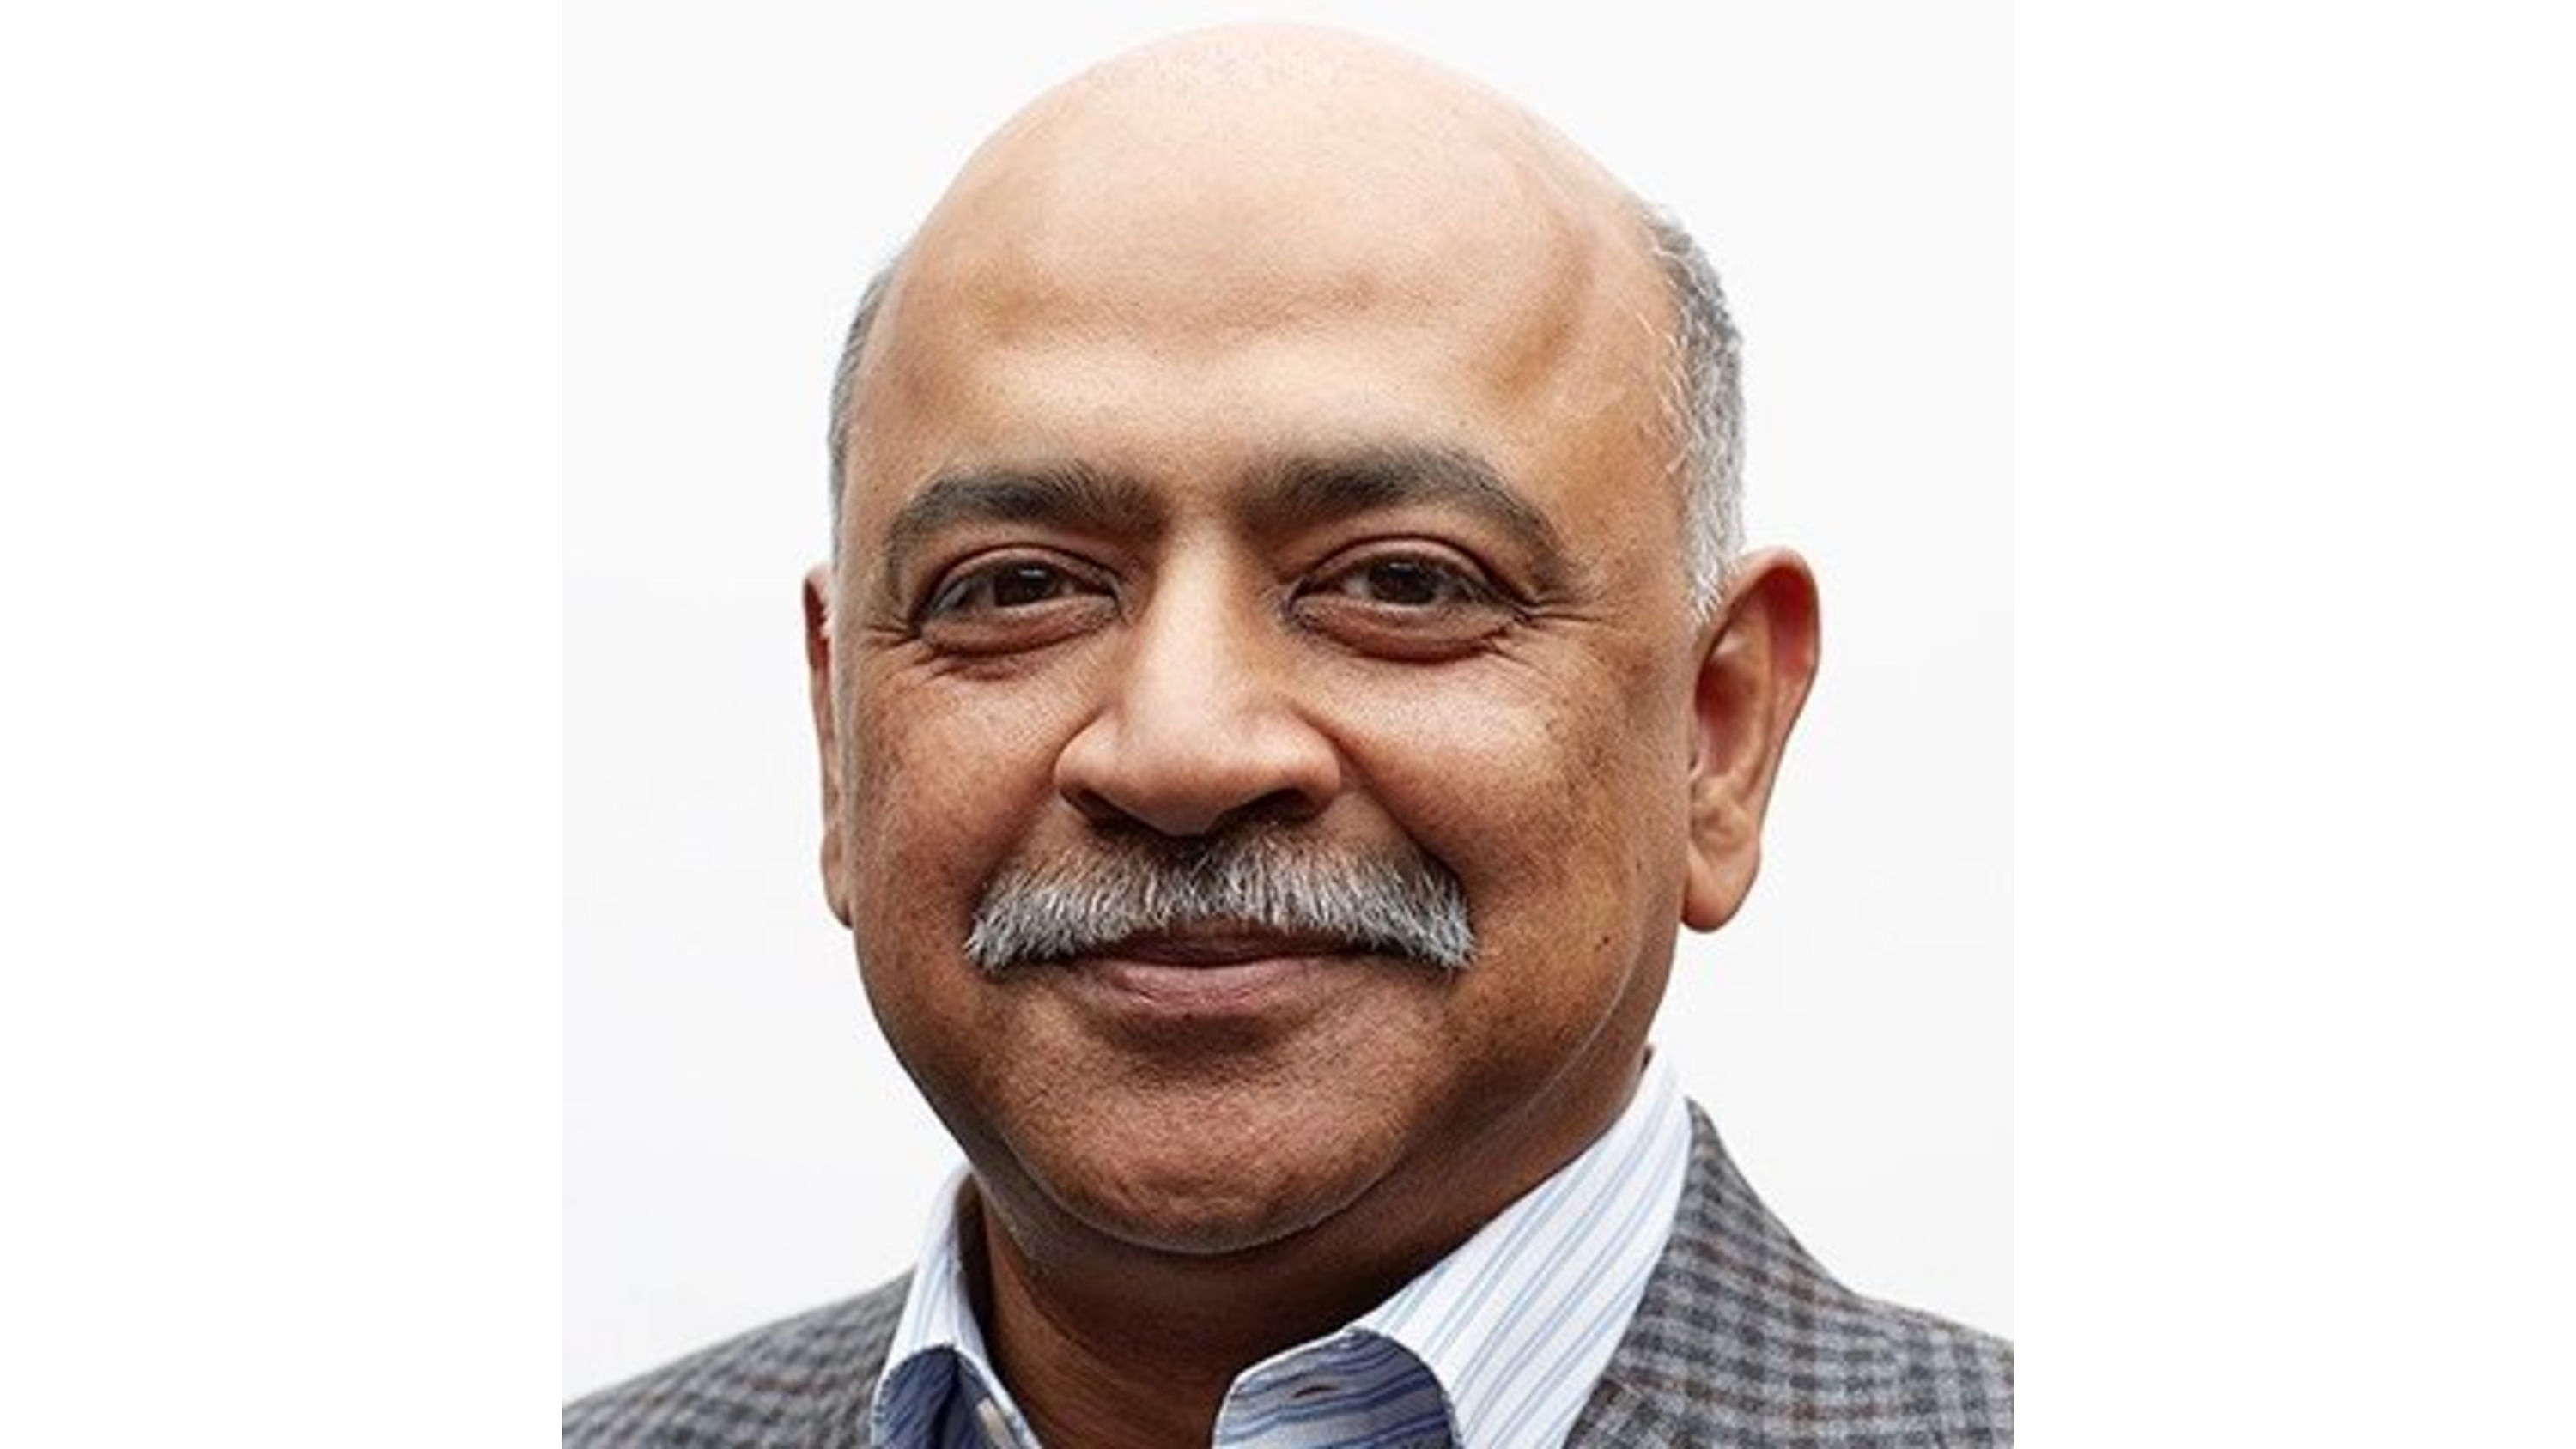 Arvind Krishna graduated in 1985 from the IIT Kanpur and holds a PhD in electrical engineering from the University of Illinois at Urbana-Champaign.  (Twitter Image/@ArvindKrishna)